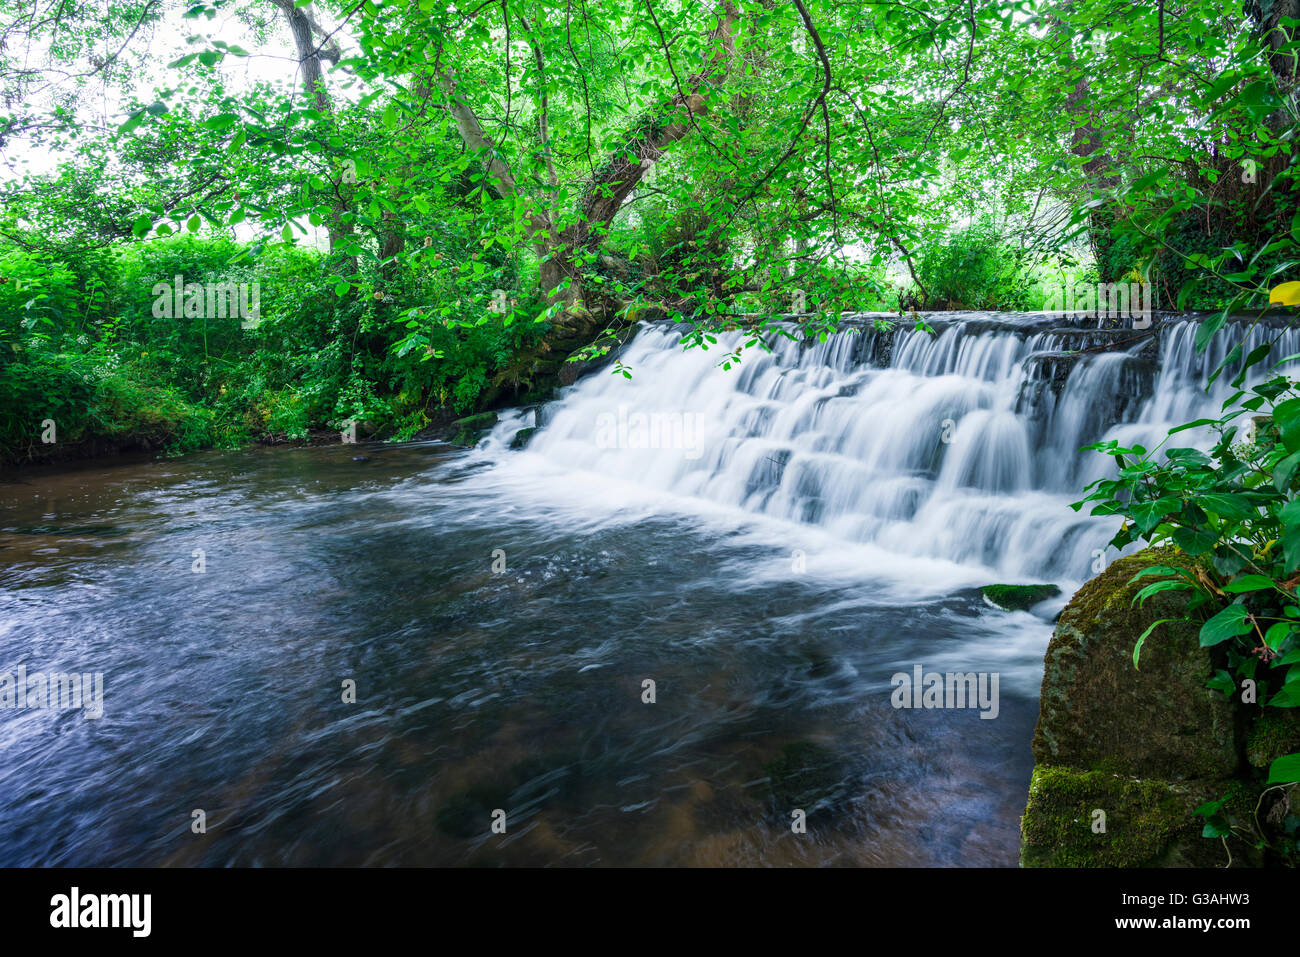 Tumbling Weir sul fiume Yeo a Wrington, North Somerset, Inghilterra. Foto Stock